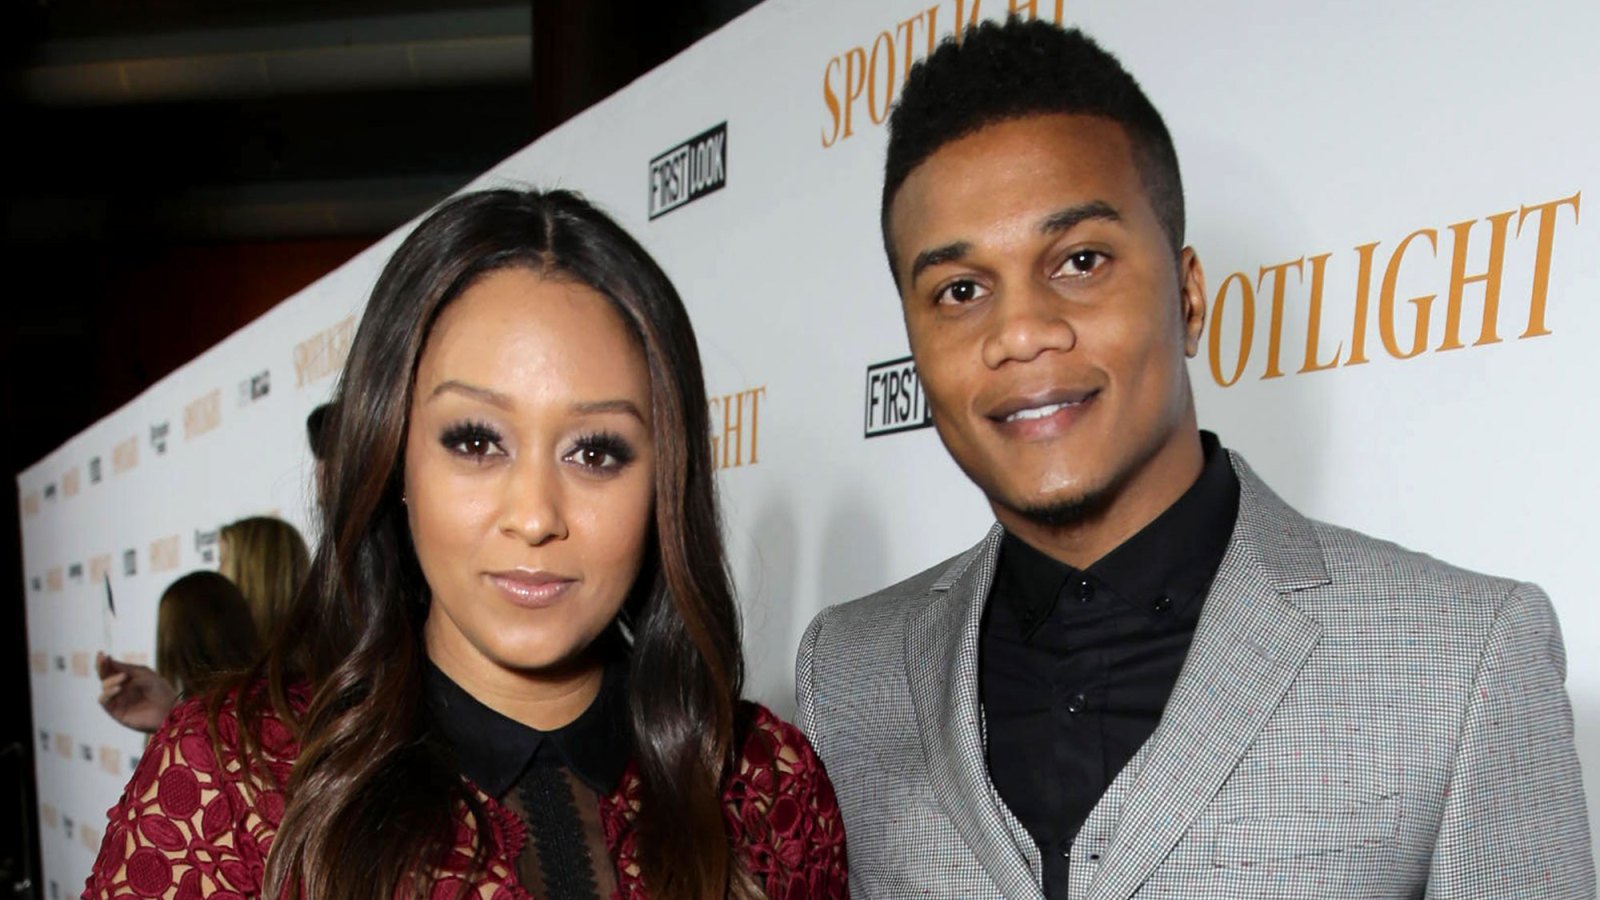 Tia Mowry and Cory Hardrict Shared Cryptic Posts Ahead of Divorce Filing